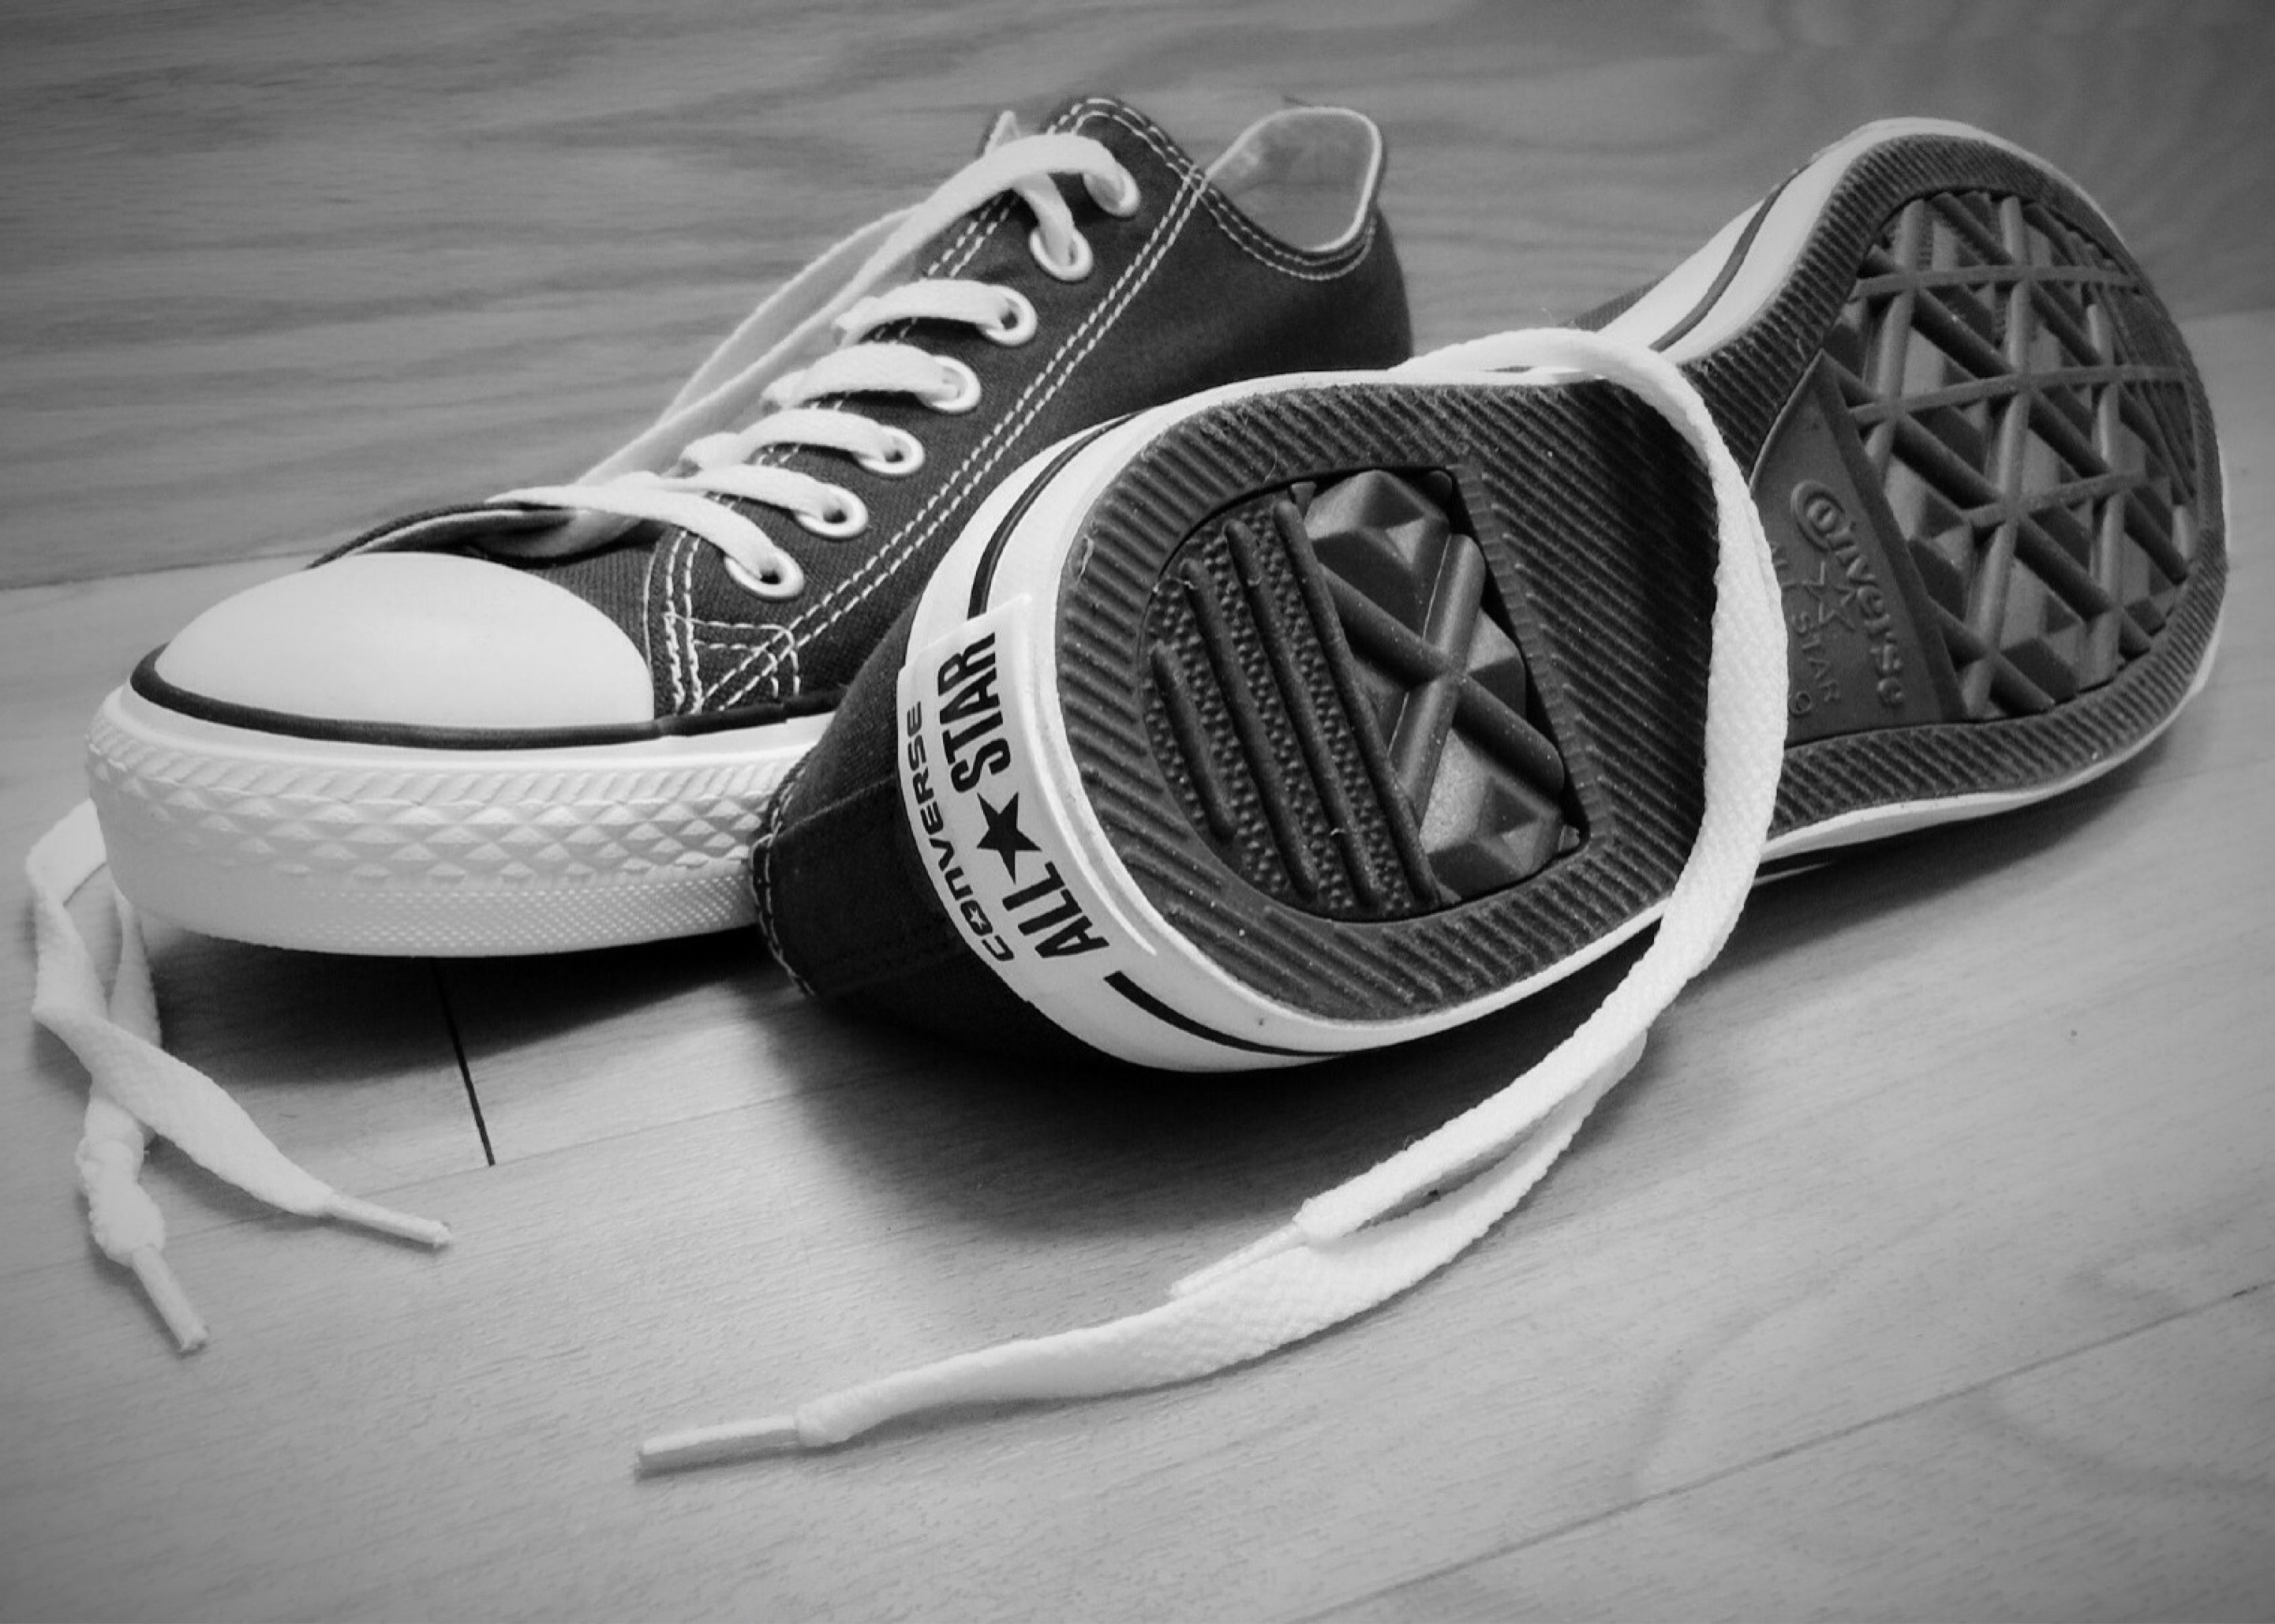 Hipster shoes free image download